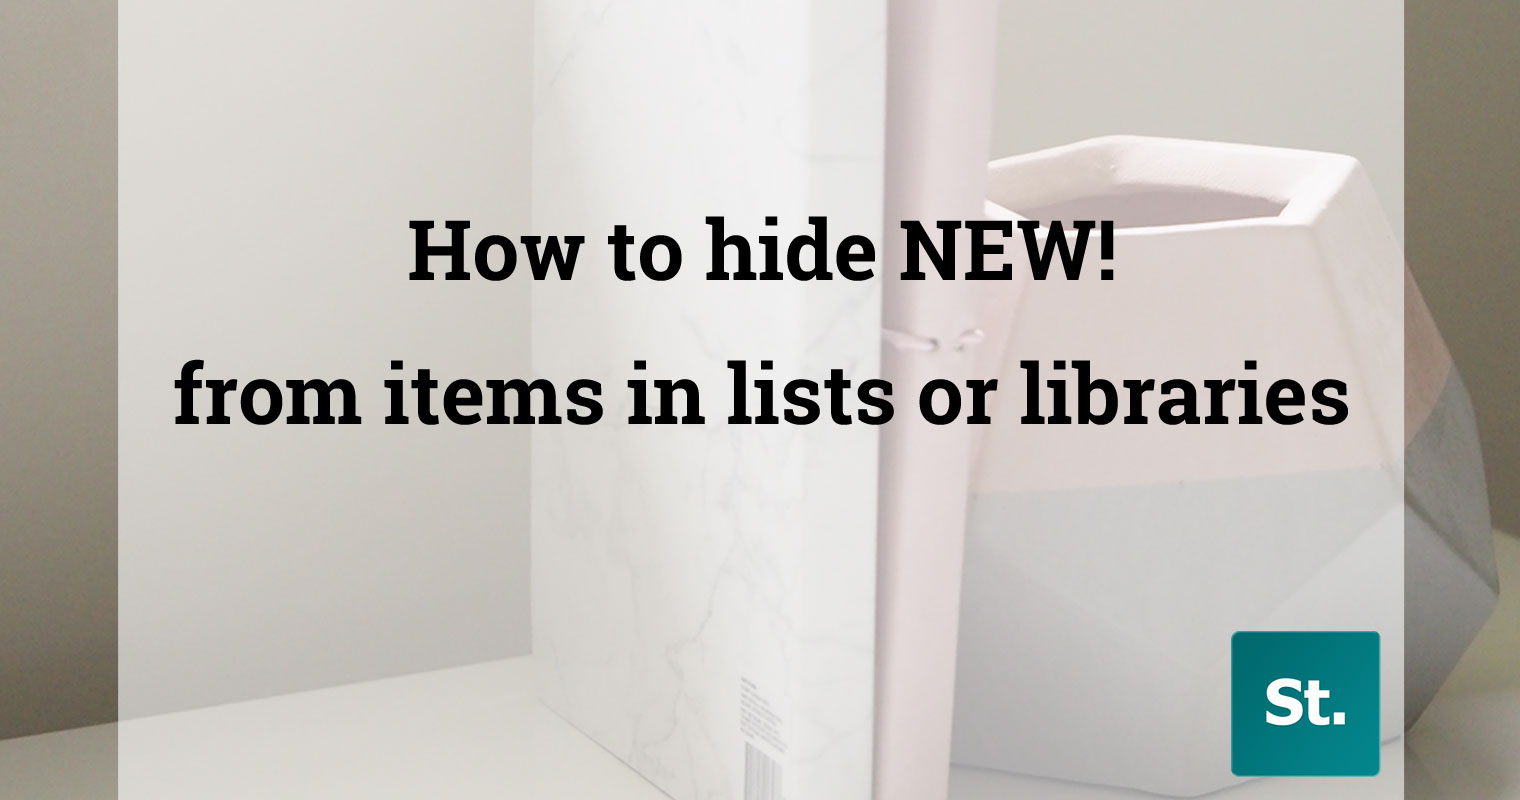 Hiding NEW! from items in lists or libraries